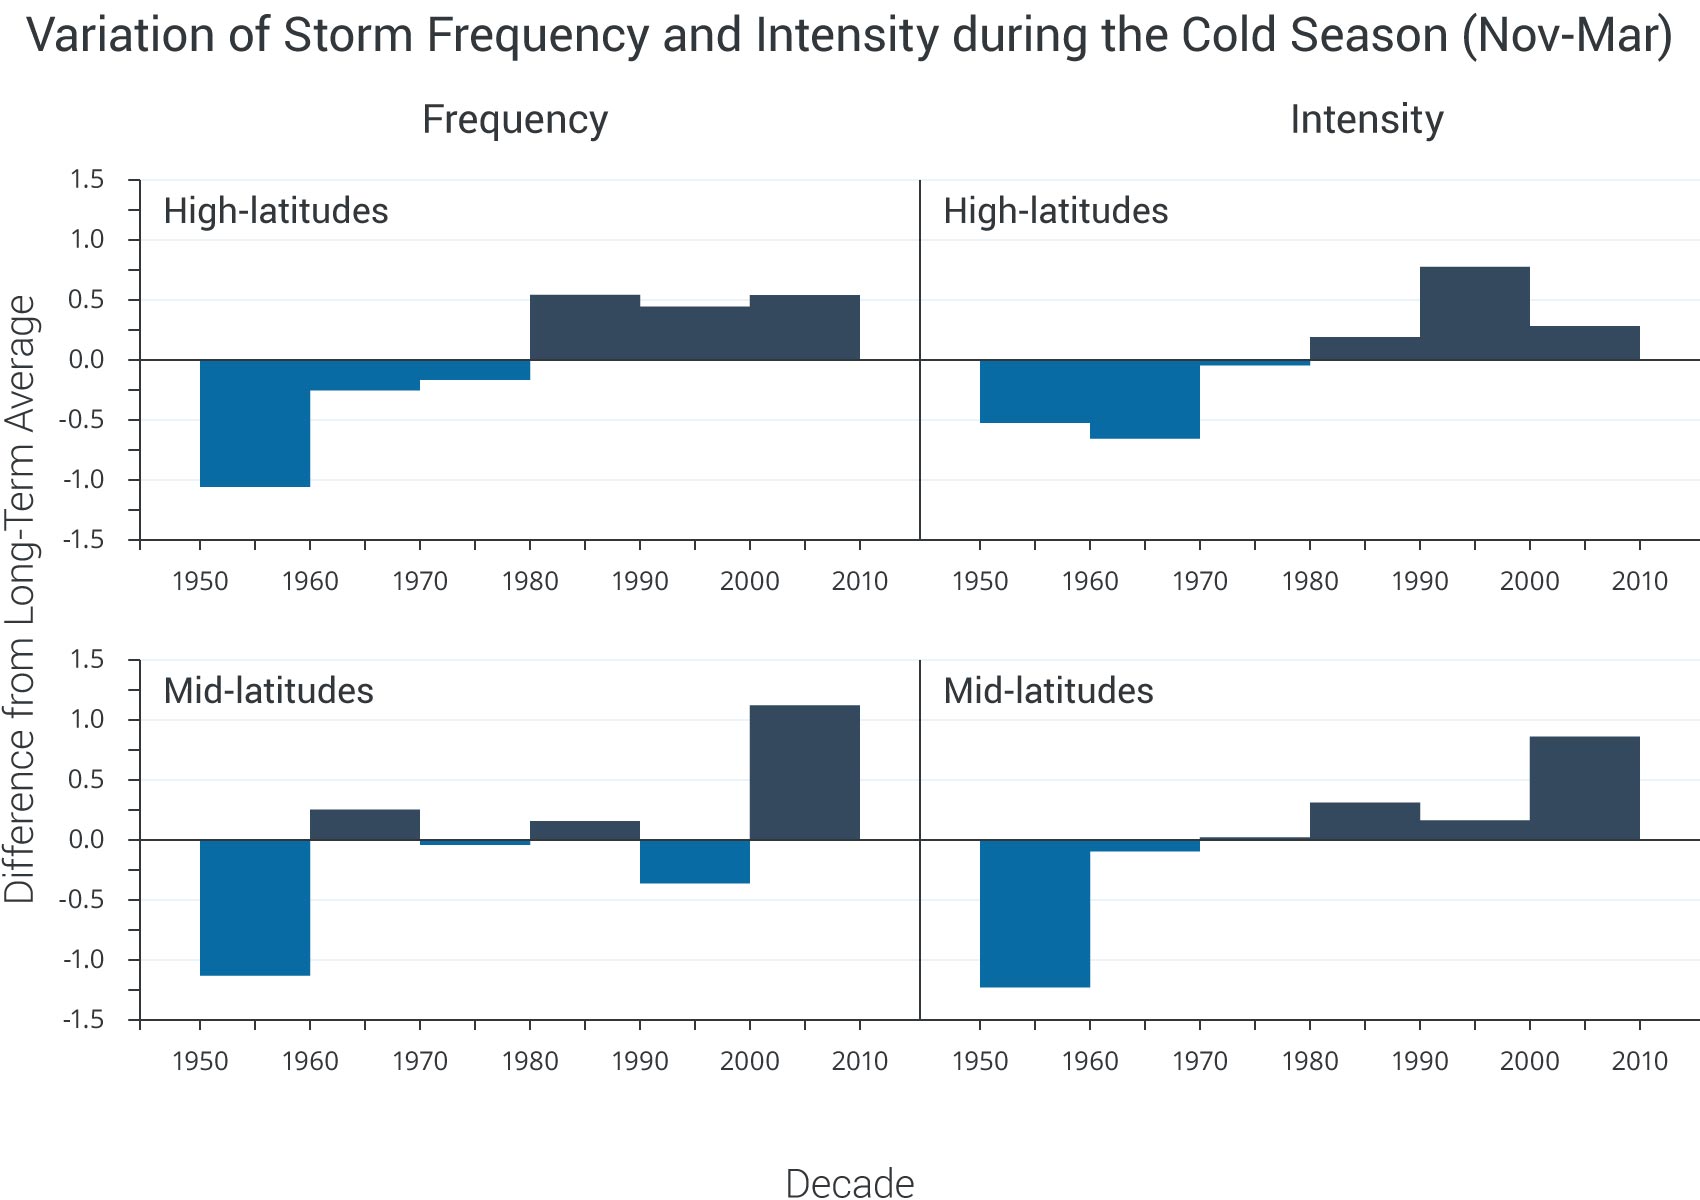 Variation of Storm Frequency and Intensity during the Cold Season (November – March)